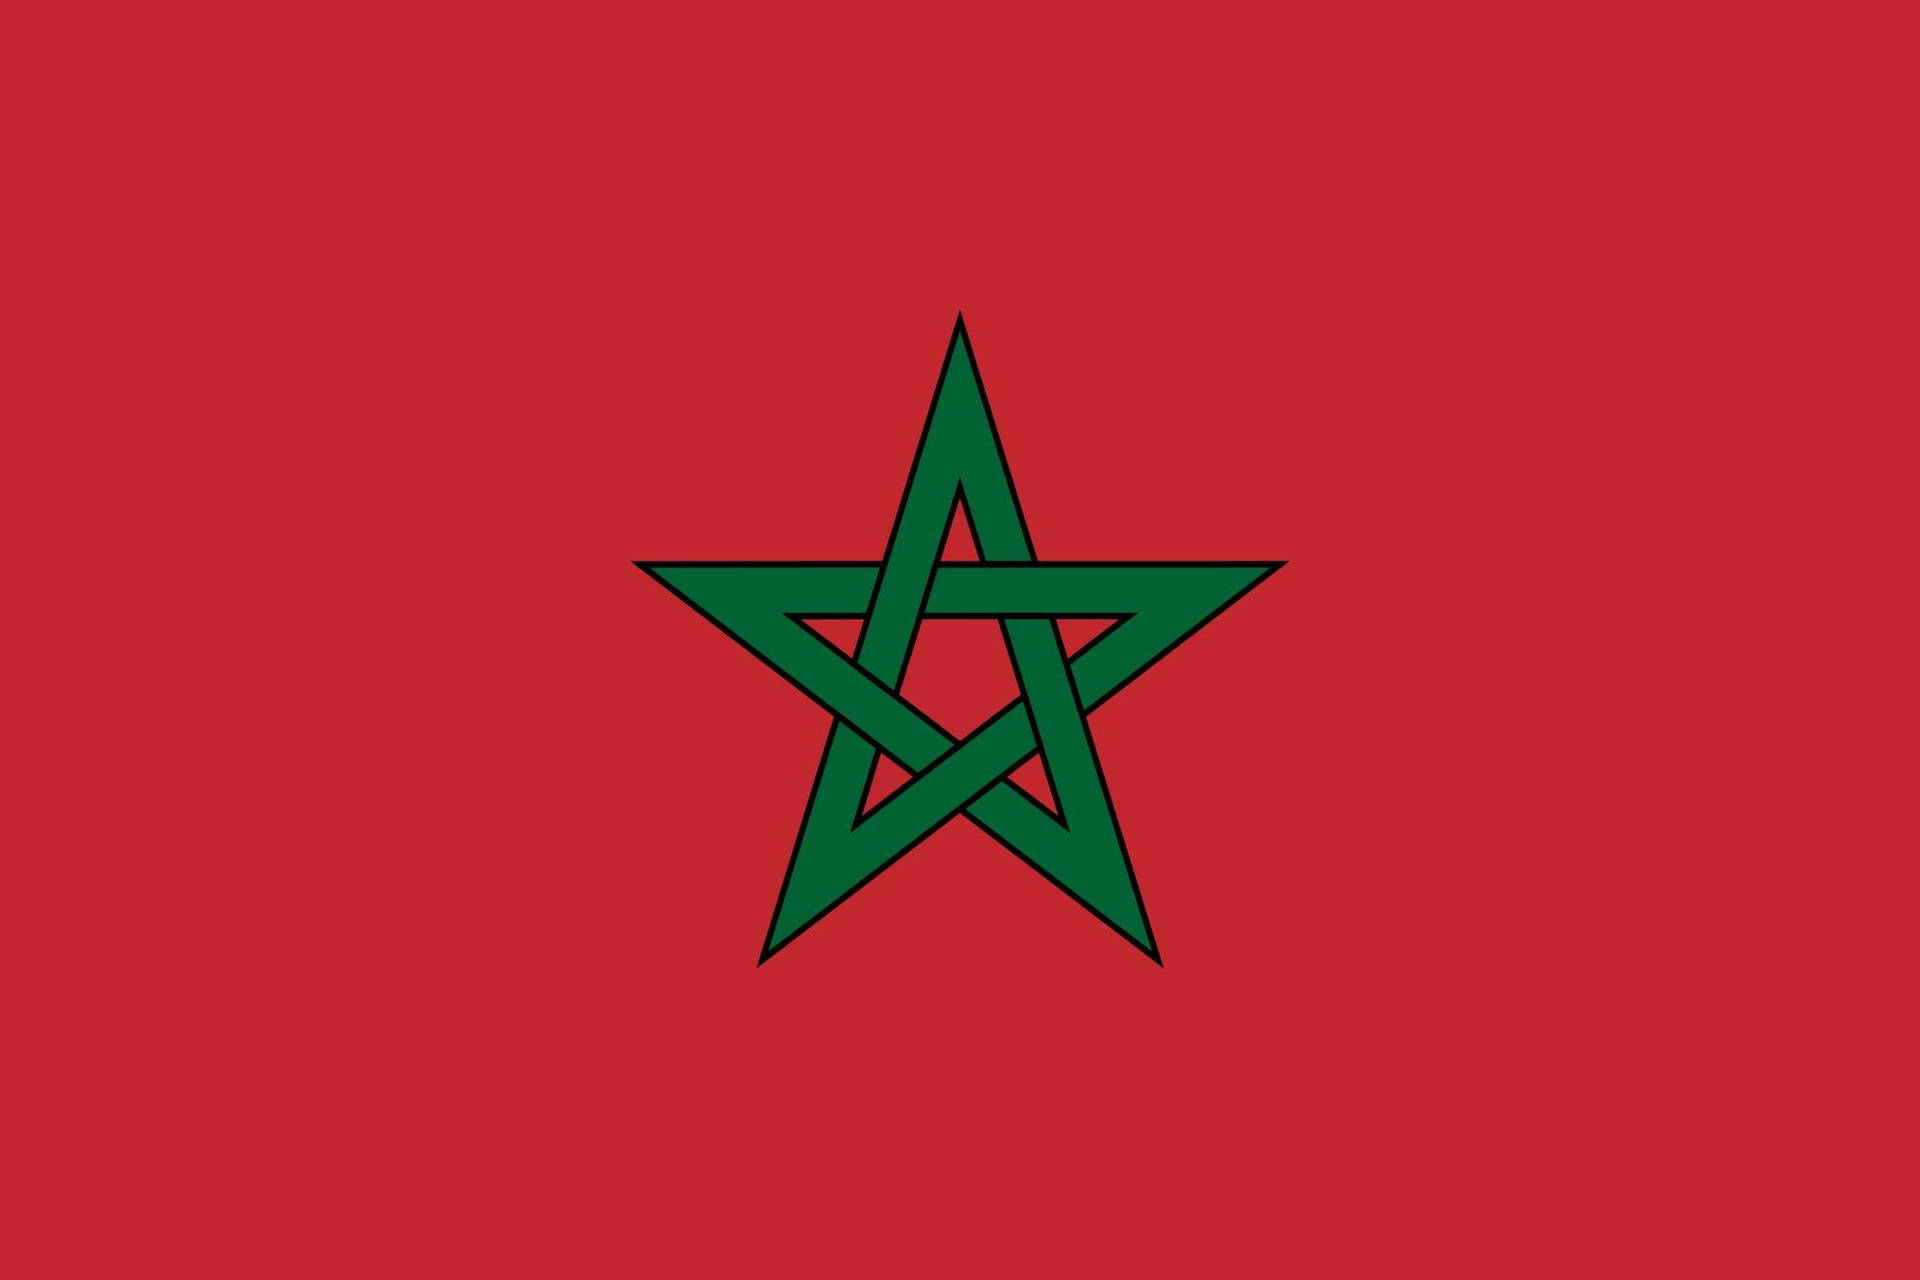 Vibrant Display Of The Moroccan Flag